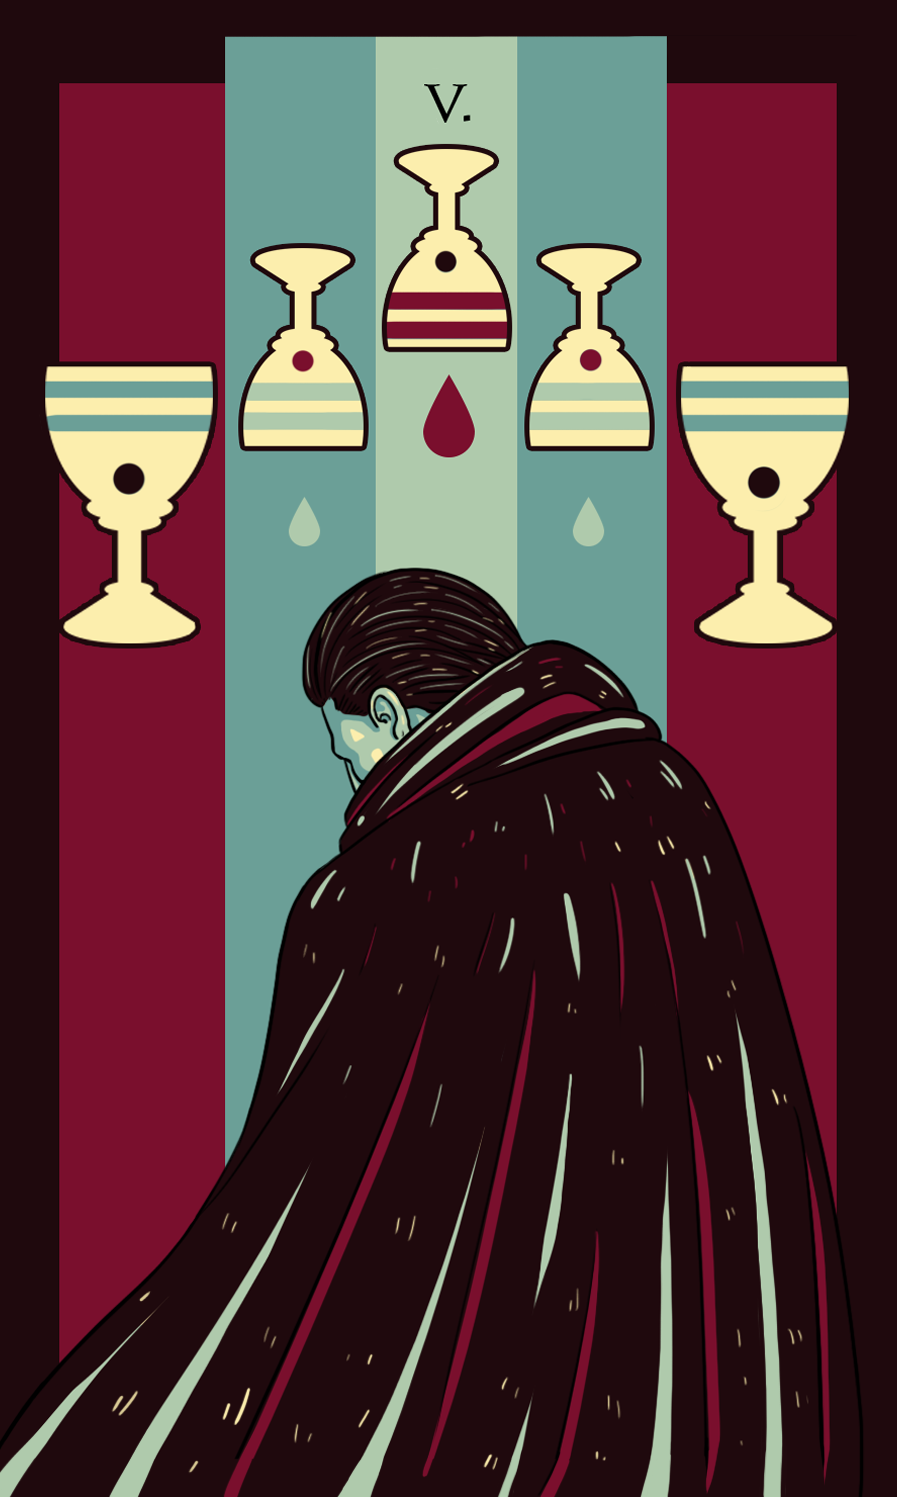  five of cups illustration